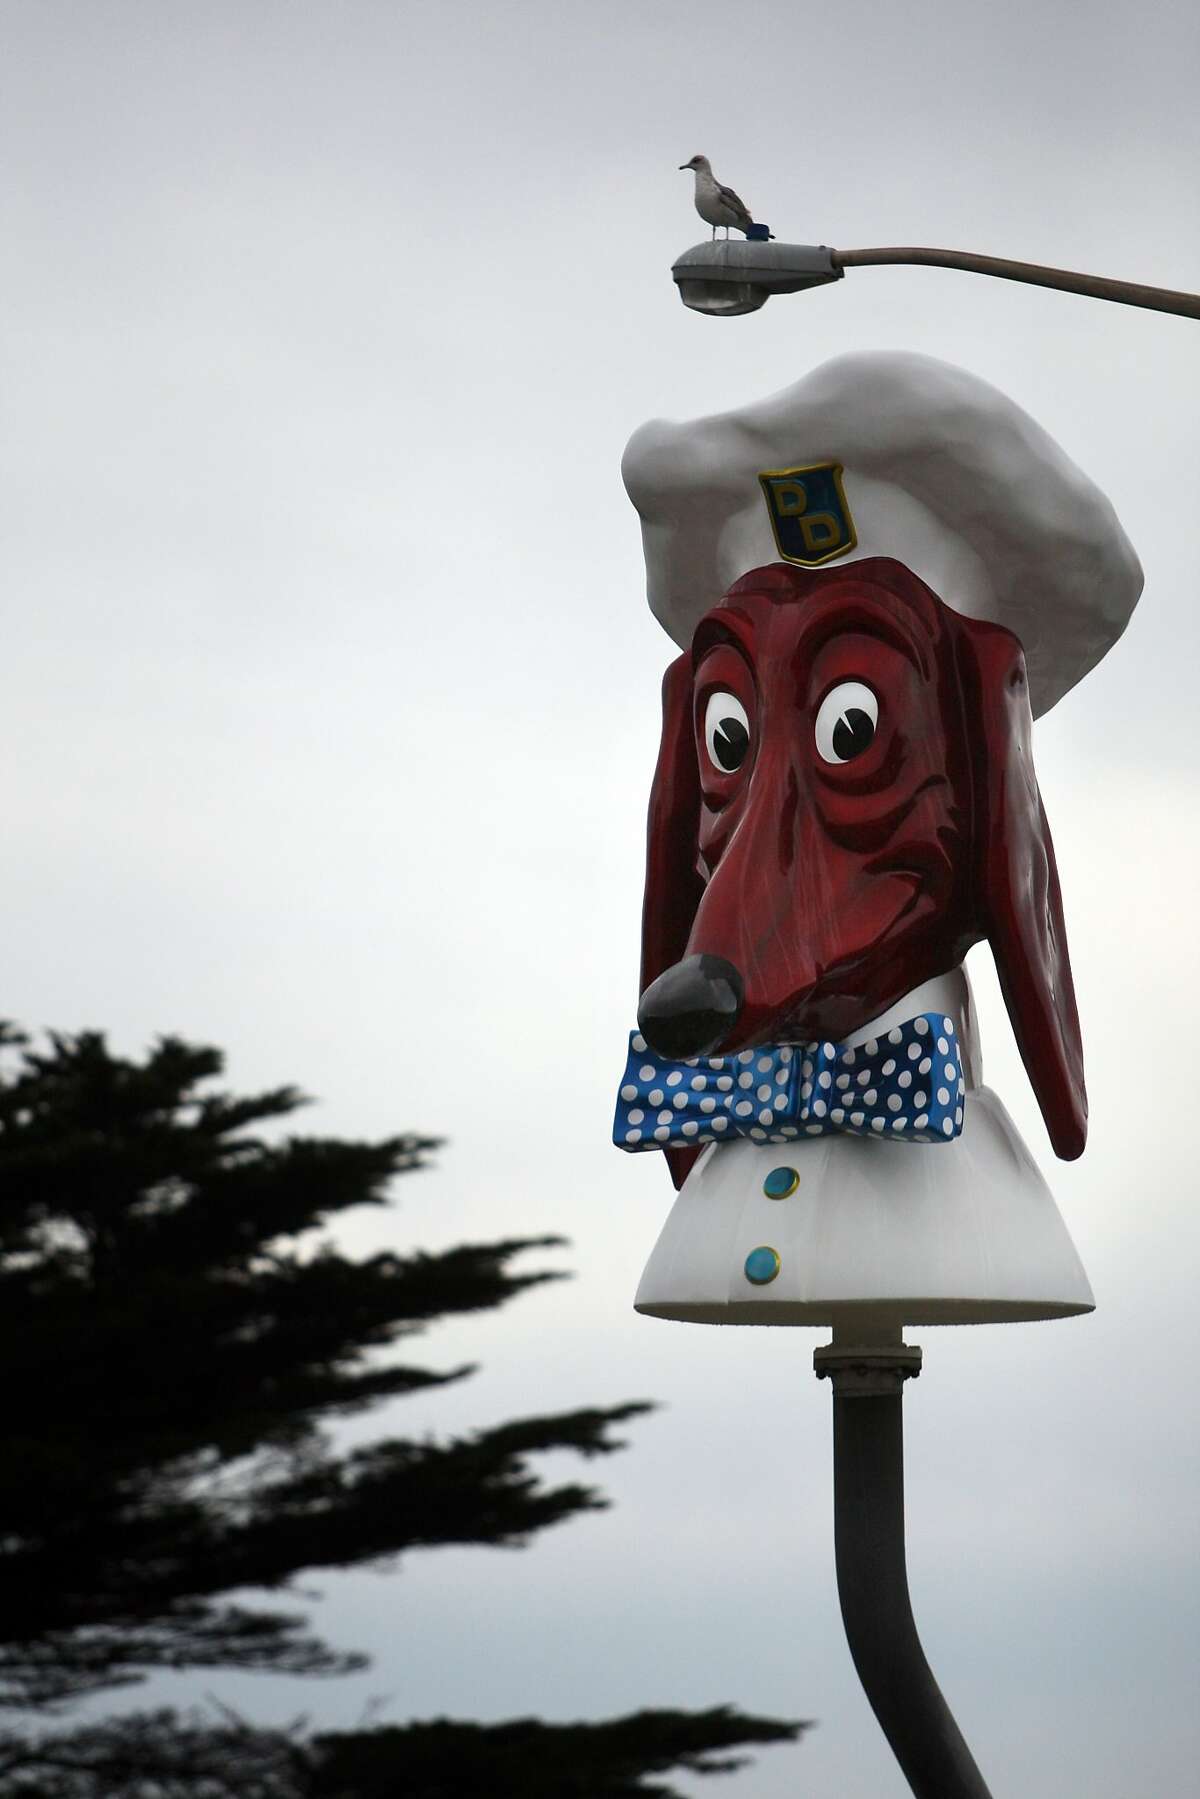 The Doggie Diner Head sits at the intersection of Sloat Blvd. and 45th Avenue, a few blocks from the ocean, in San Francisco, Calif. on Feb. 15 2014.